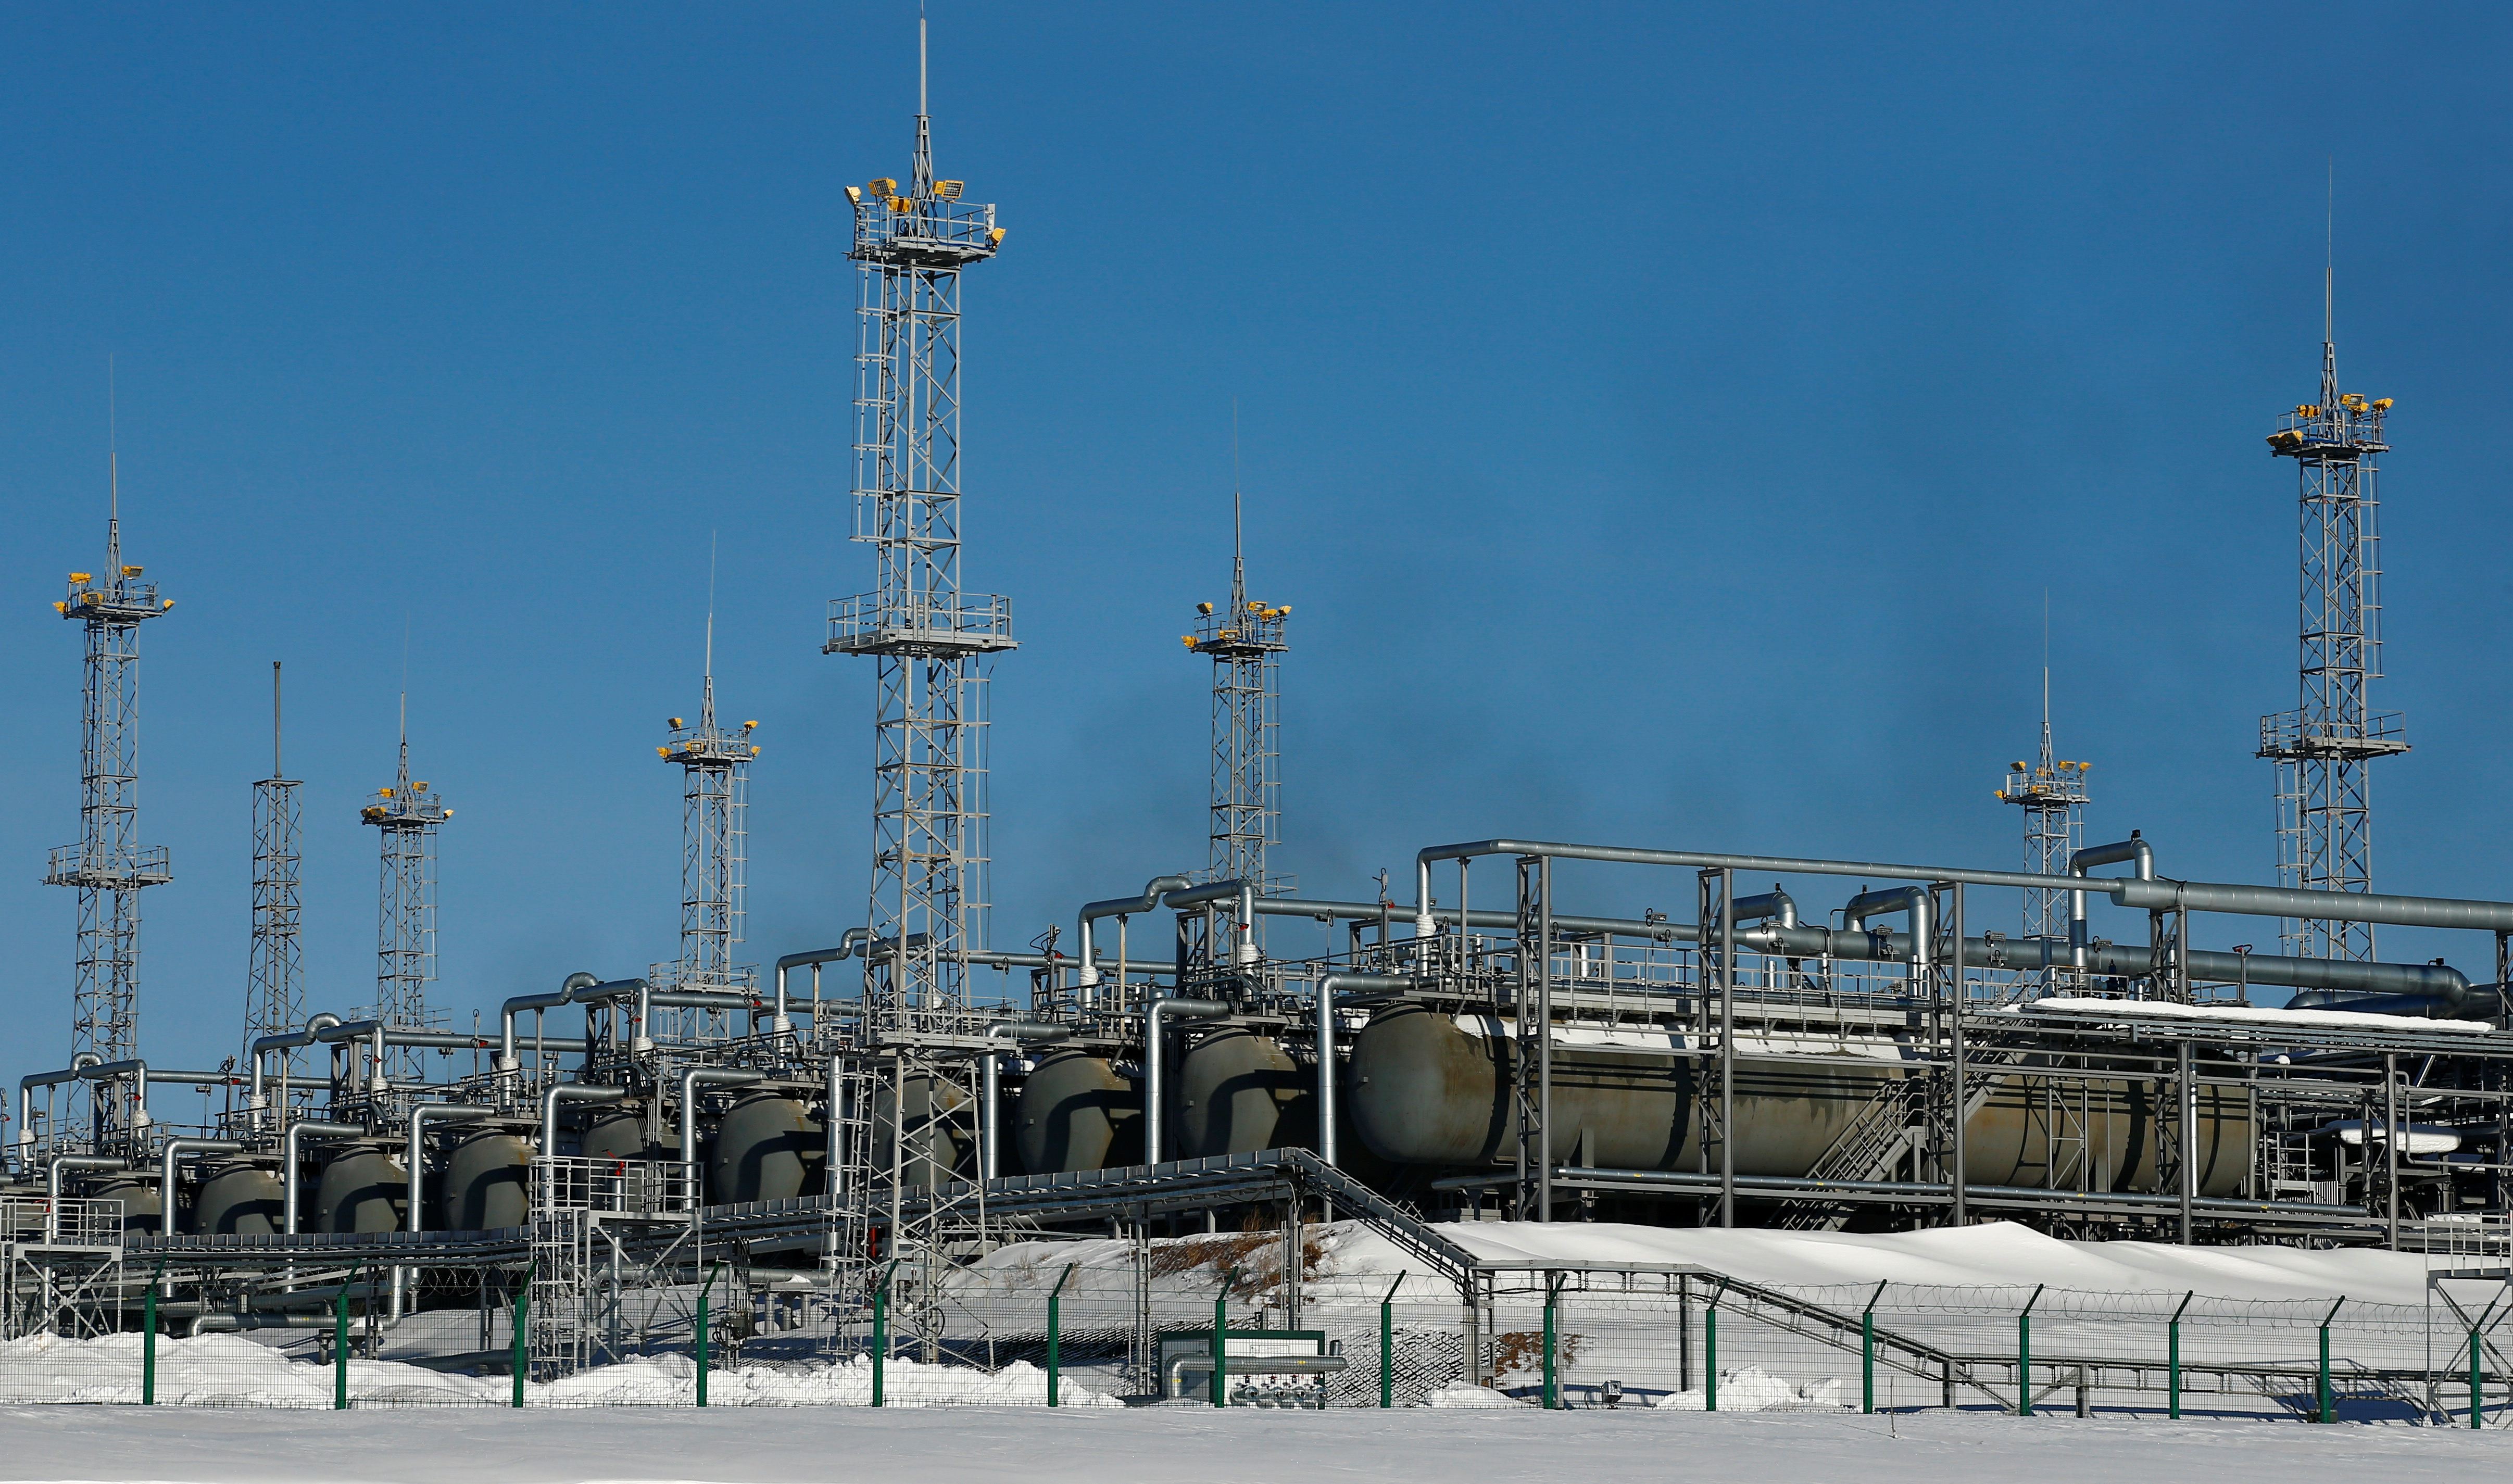 A general view shows tanks with liquefied propane-butane at a natural and associated petroleum gas processing plant in the Yarakta Oil Field. March 11, 2019. REUTERS/Vasily Fedosenko